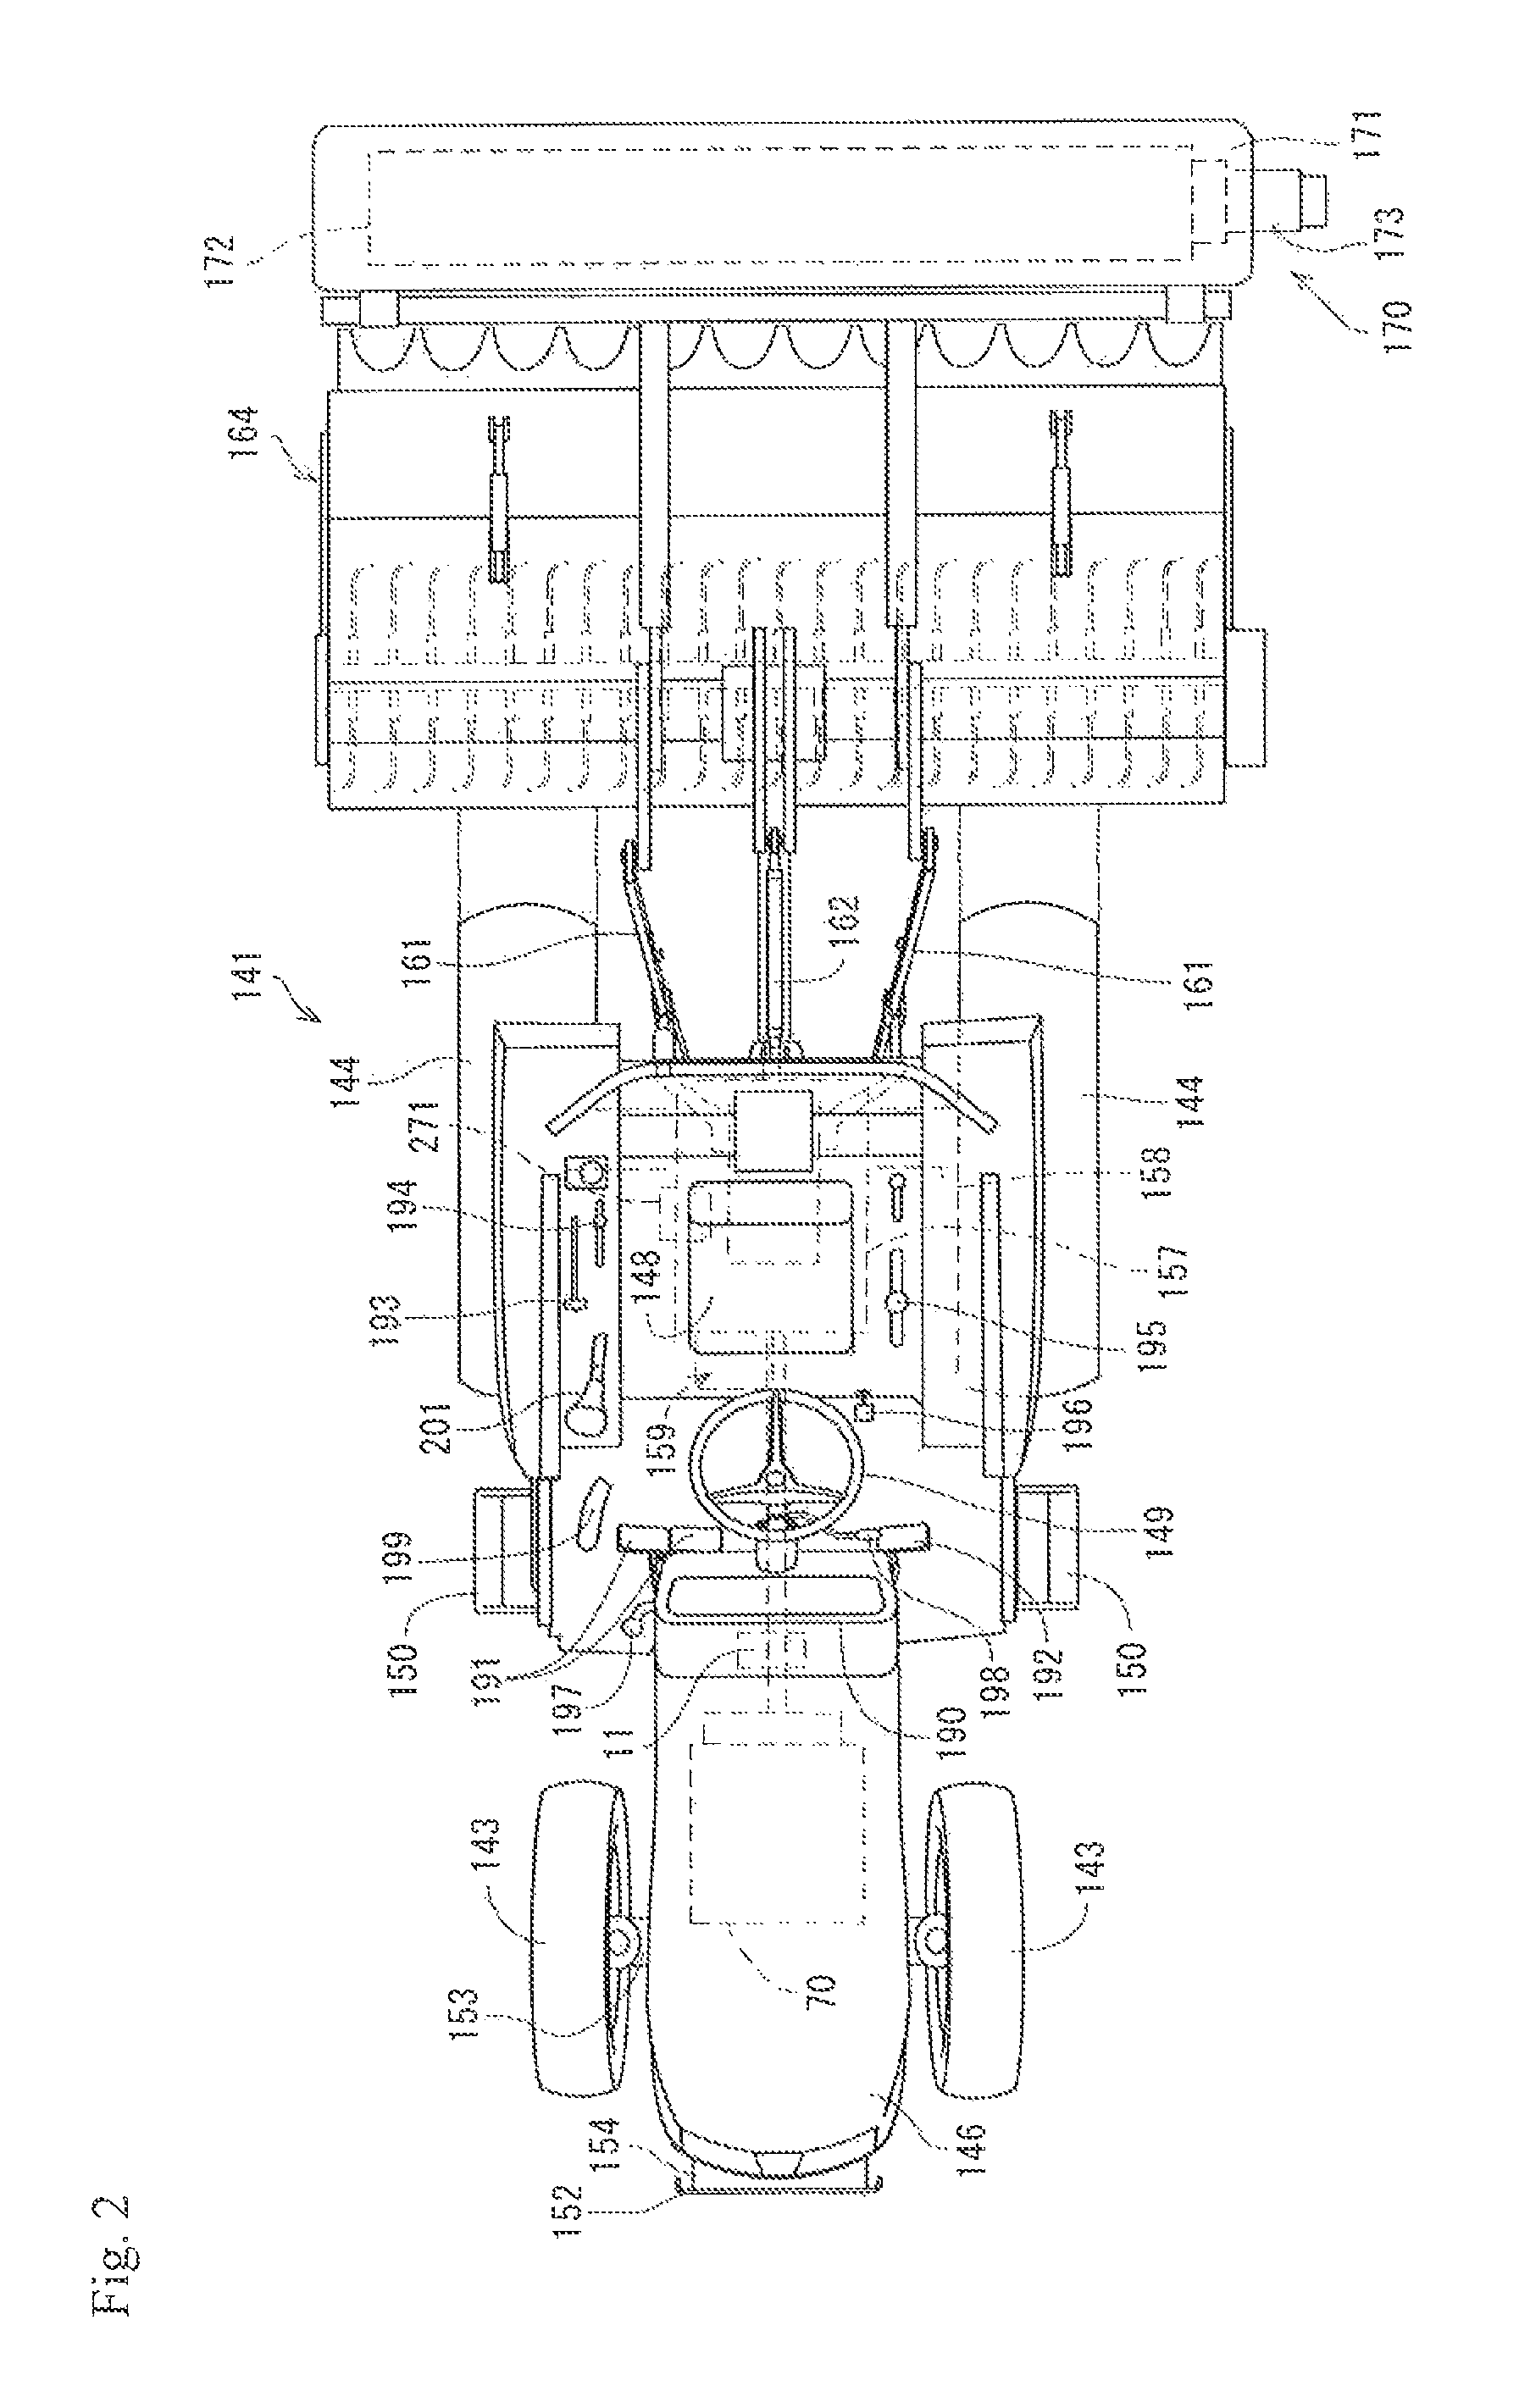 Drive system control device for working vehicle